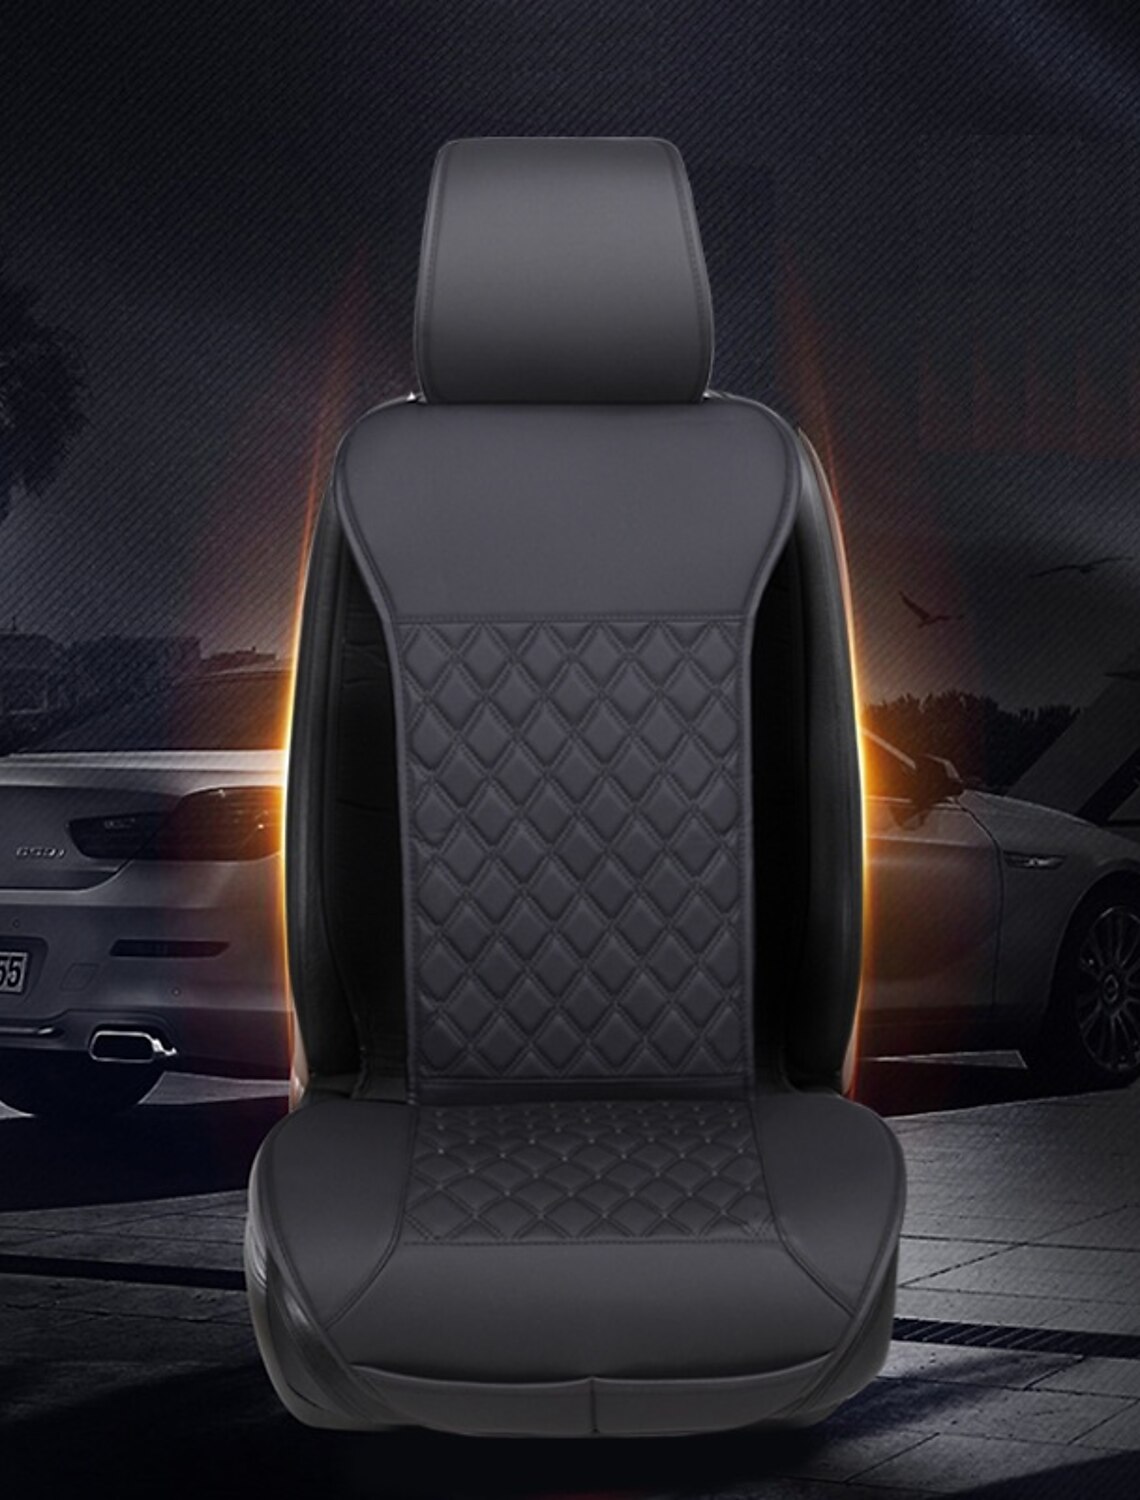 Universal Fit for 95% Vehicles Front Car Seat Cushions Bottom Seat Covers of Full Wrapped Edge Auto Newer Luxury Car Seat Cover Black+Grey,2PCS Breathable Car Seat Cover Fit Four Seasons 